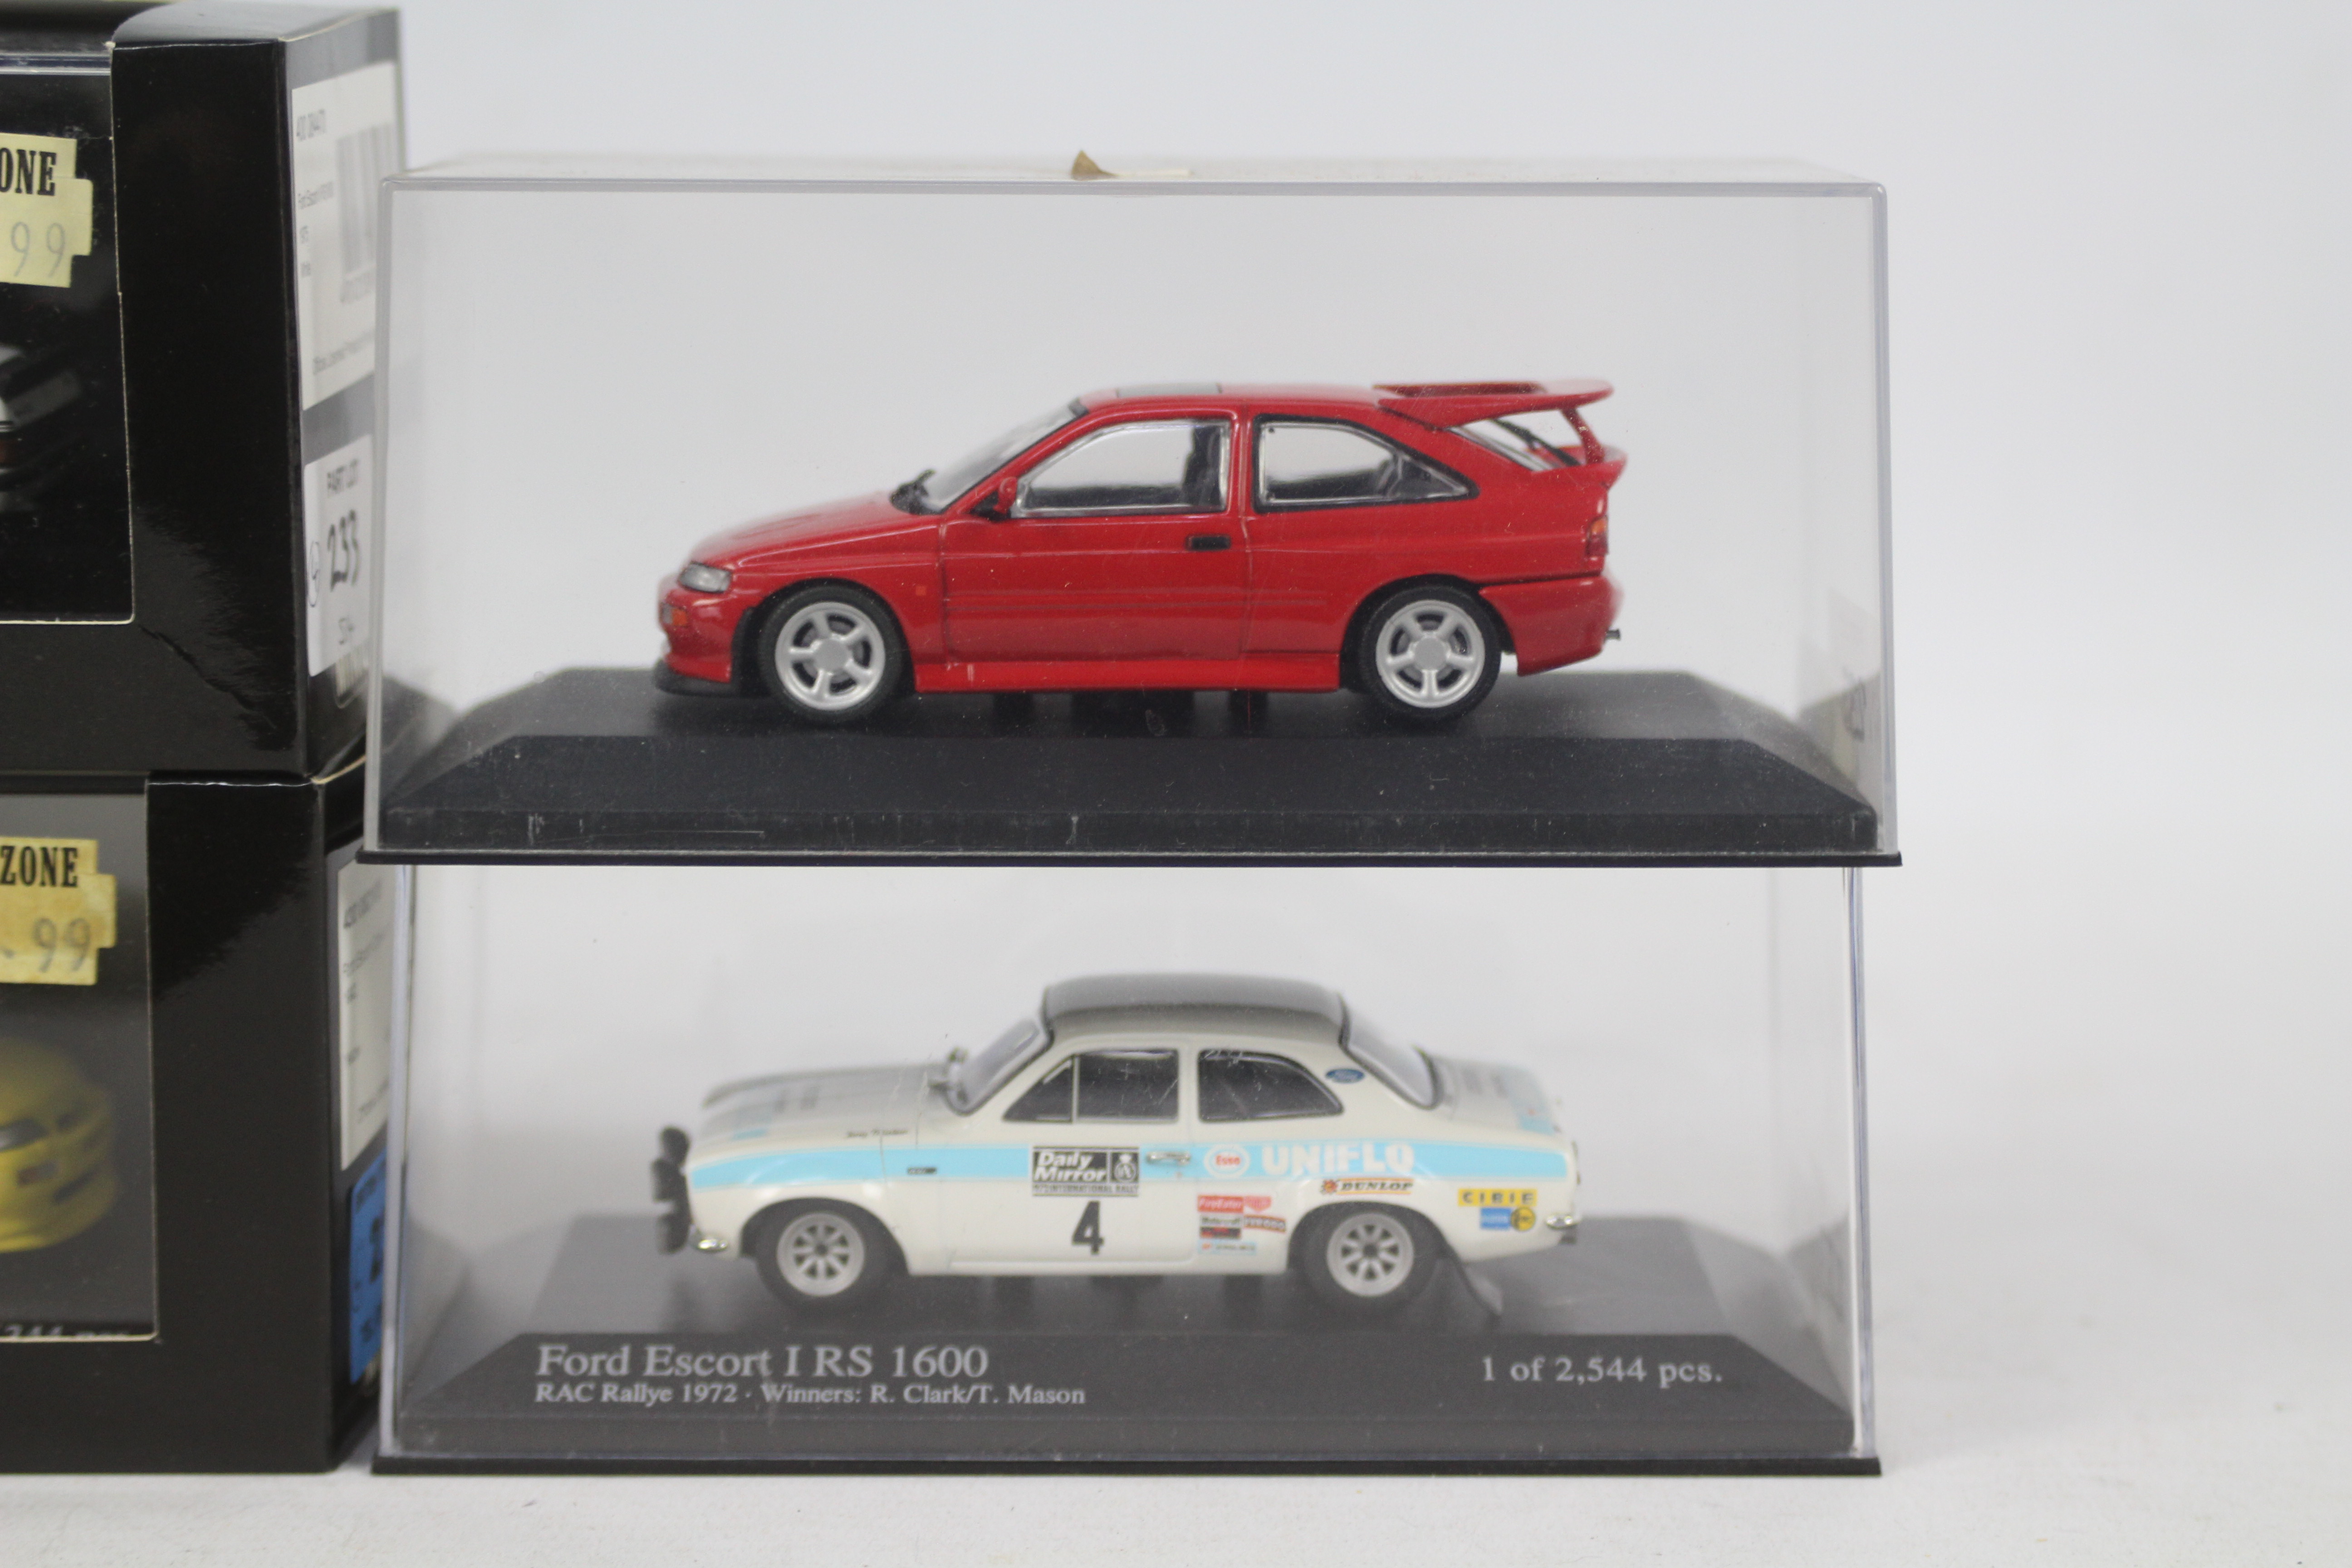 Minichamps - 4 x boxed 1:43 scale Ford Escort models, - Image 3 of 3